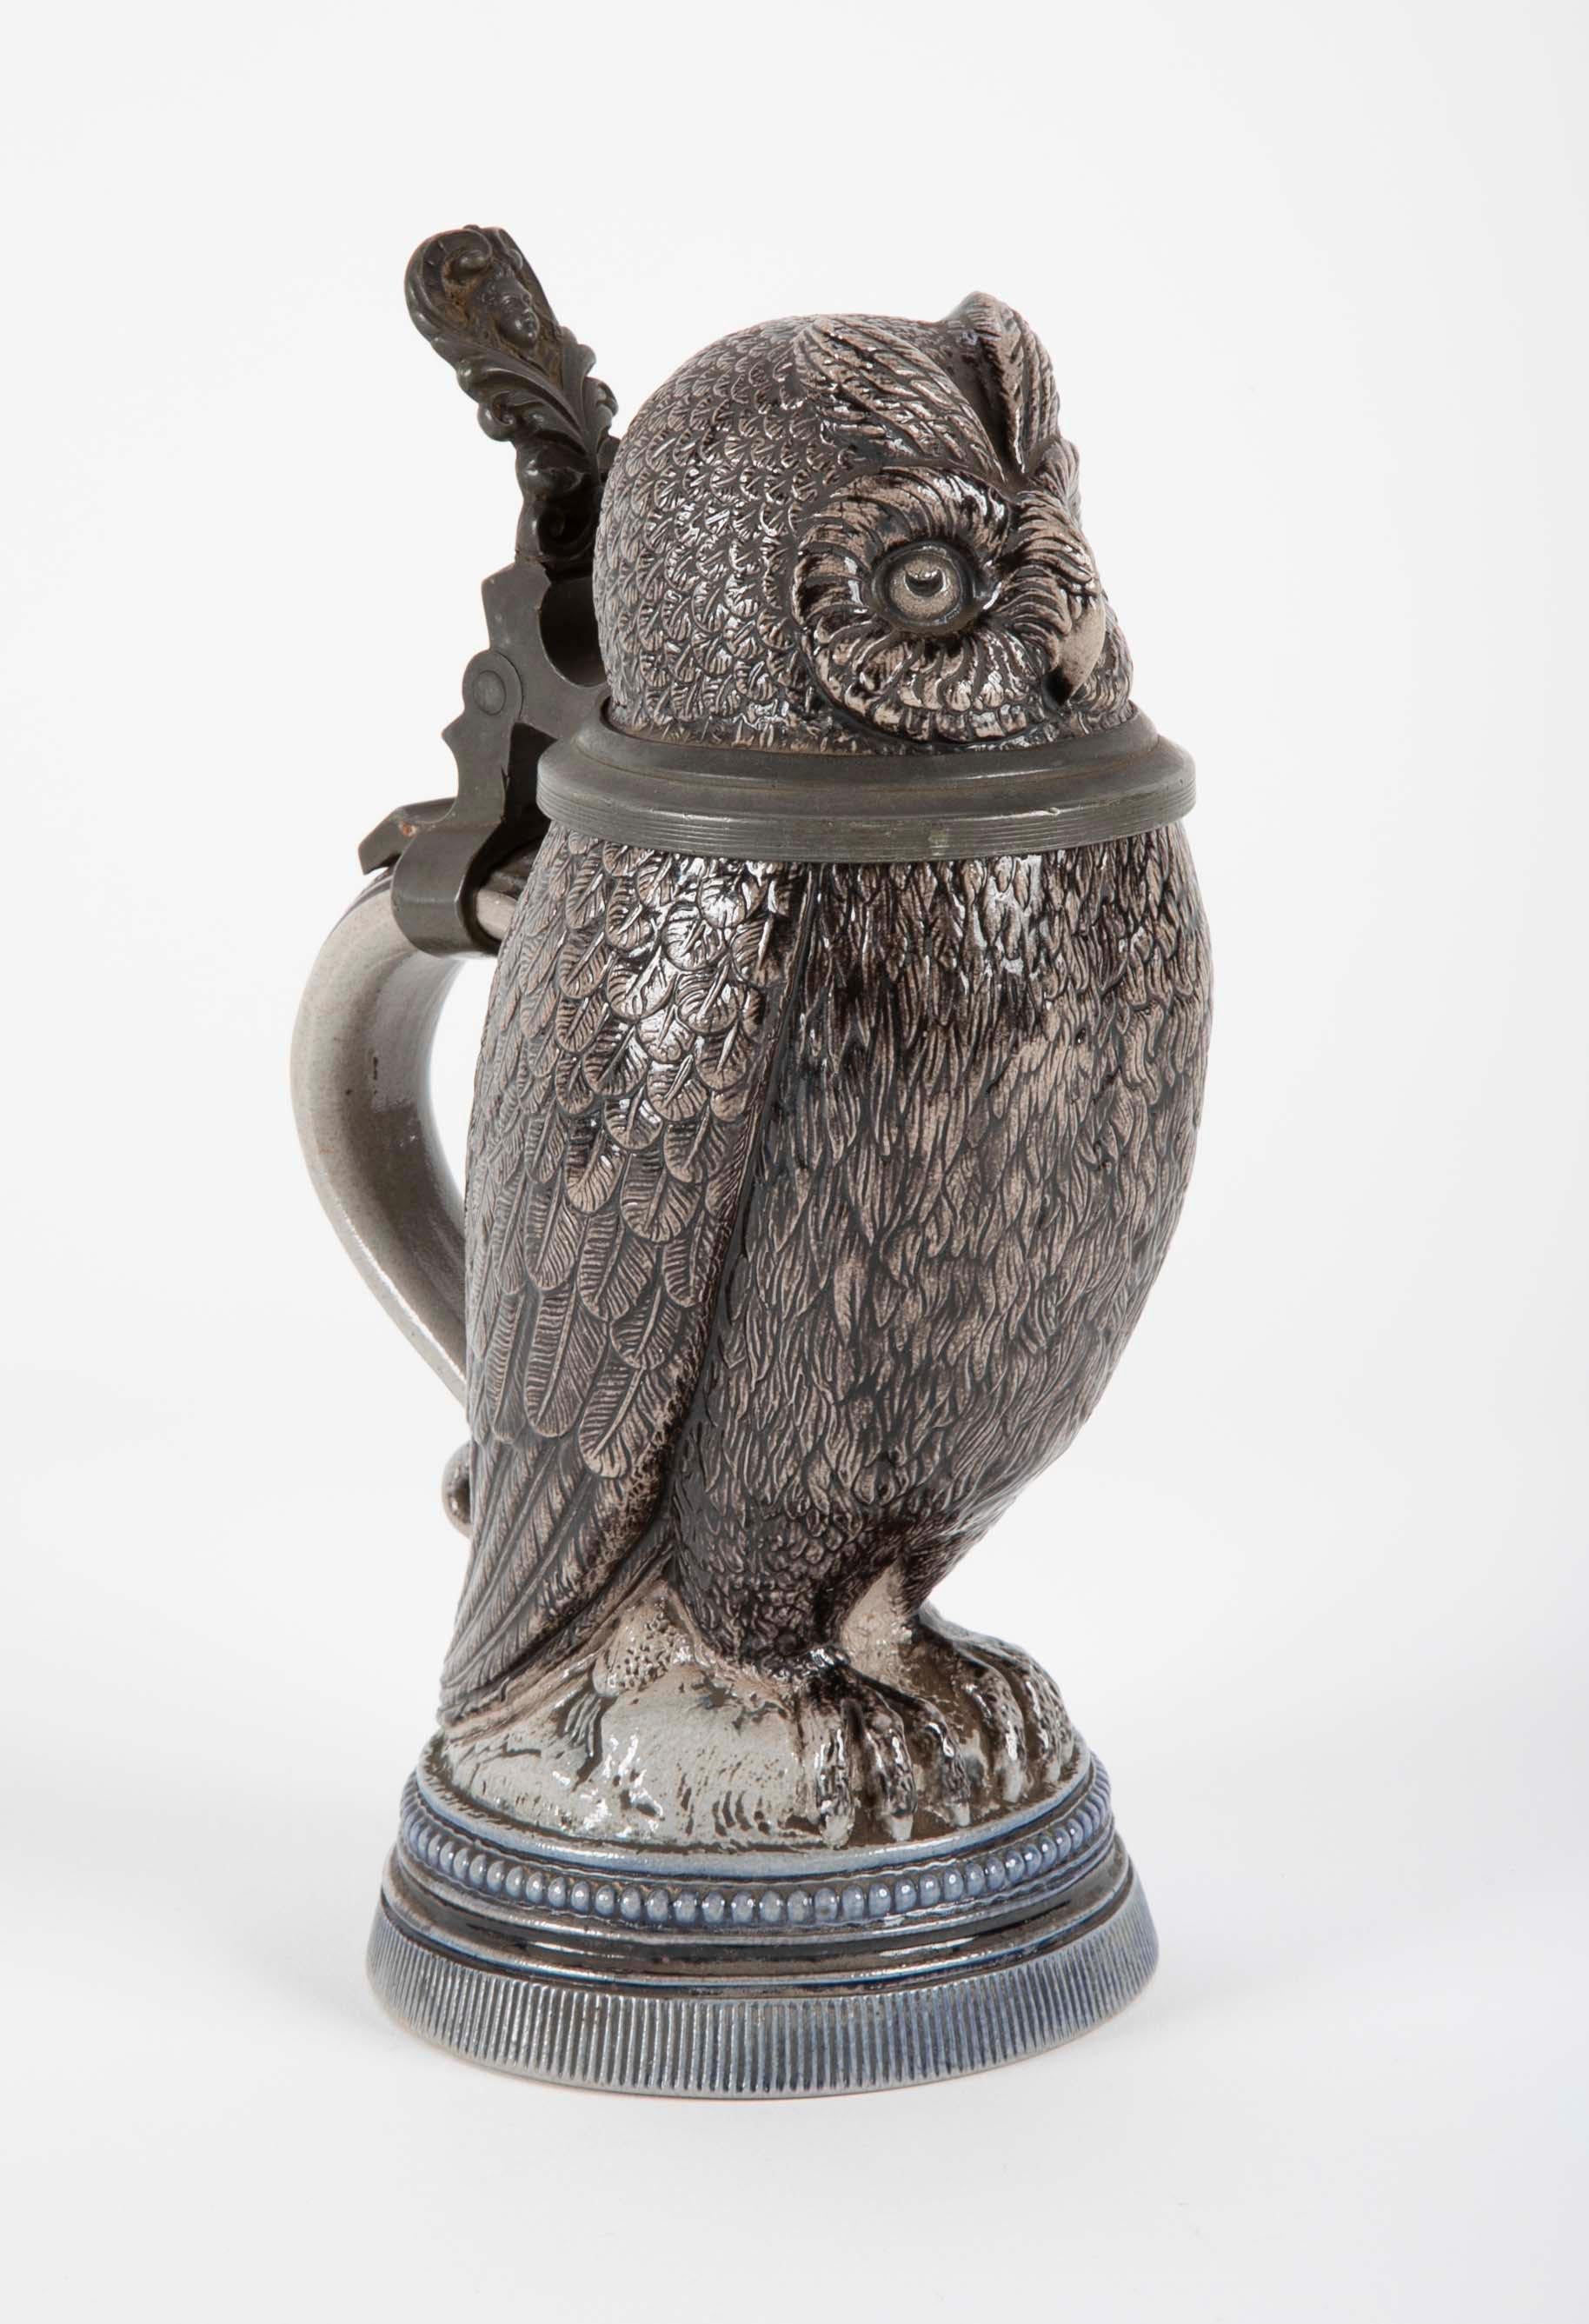 An extremely charming stoneware tankard in the form of an owl. With a two toned gray and blue glaze and handsome pewter mounts. The thumb lift depicting a female face within a heart shaped frame. Likely Mettlach, incised mark on base